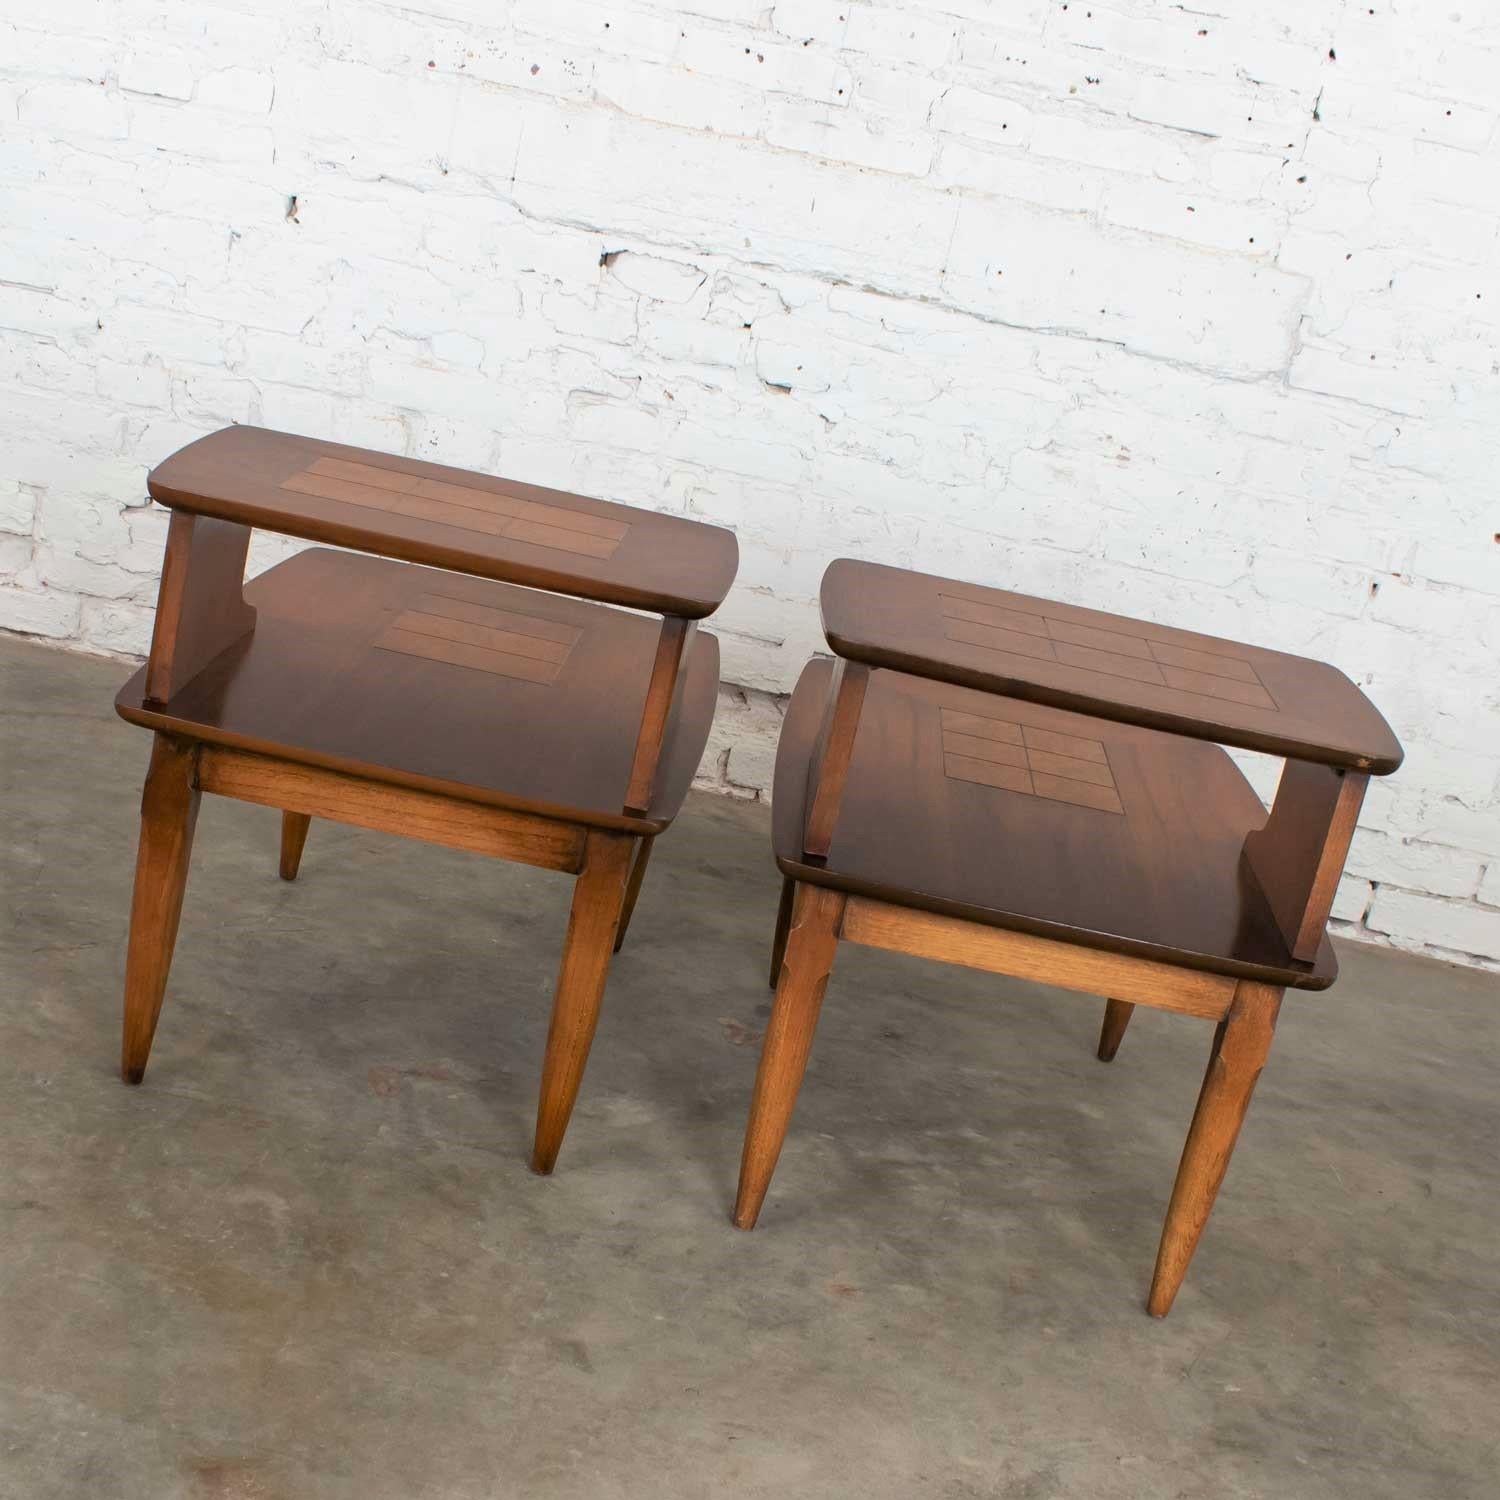 Mid-Century Modern Pair of Lane Step End Tables with Inlaid Walnut Burl Style In Good Condition For Sale In Topeka, KS